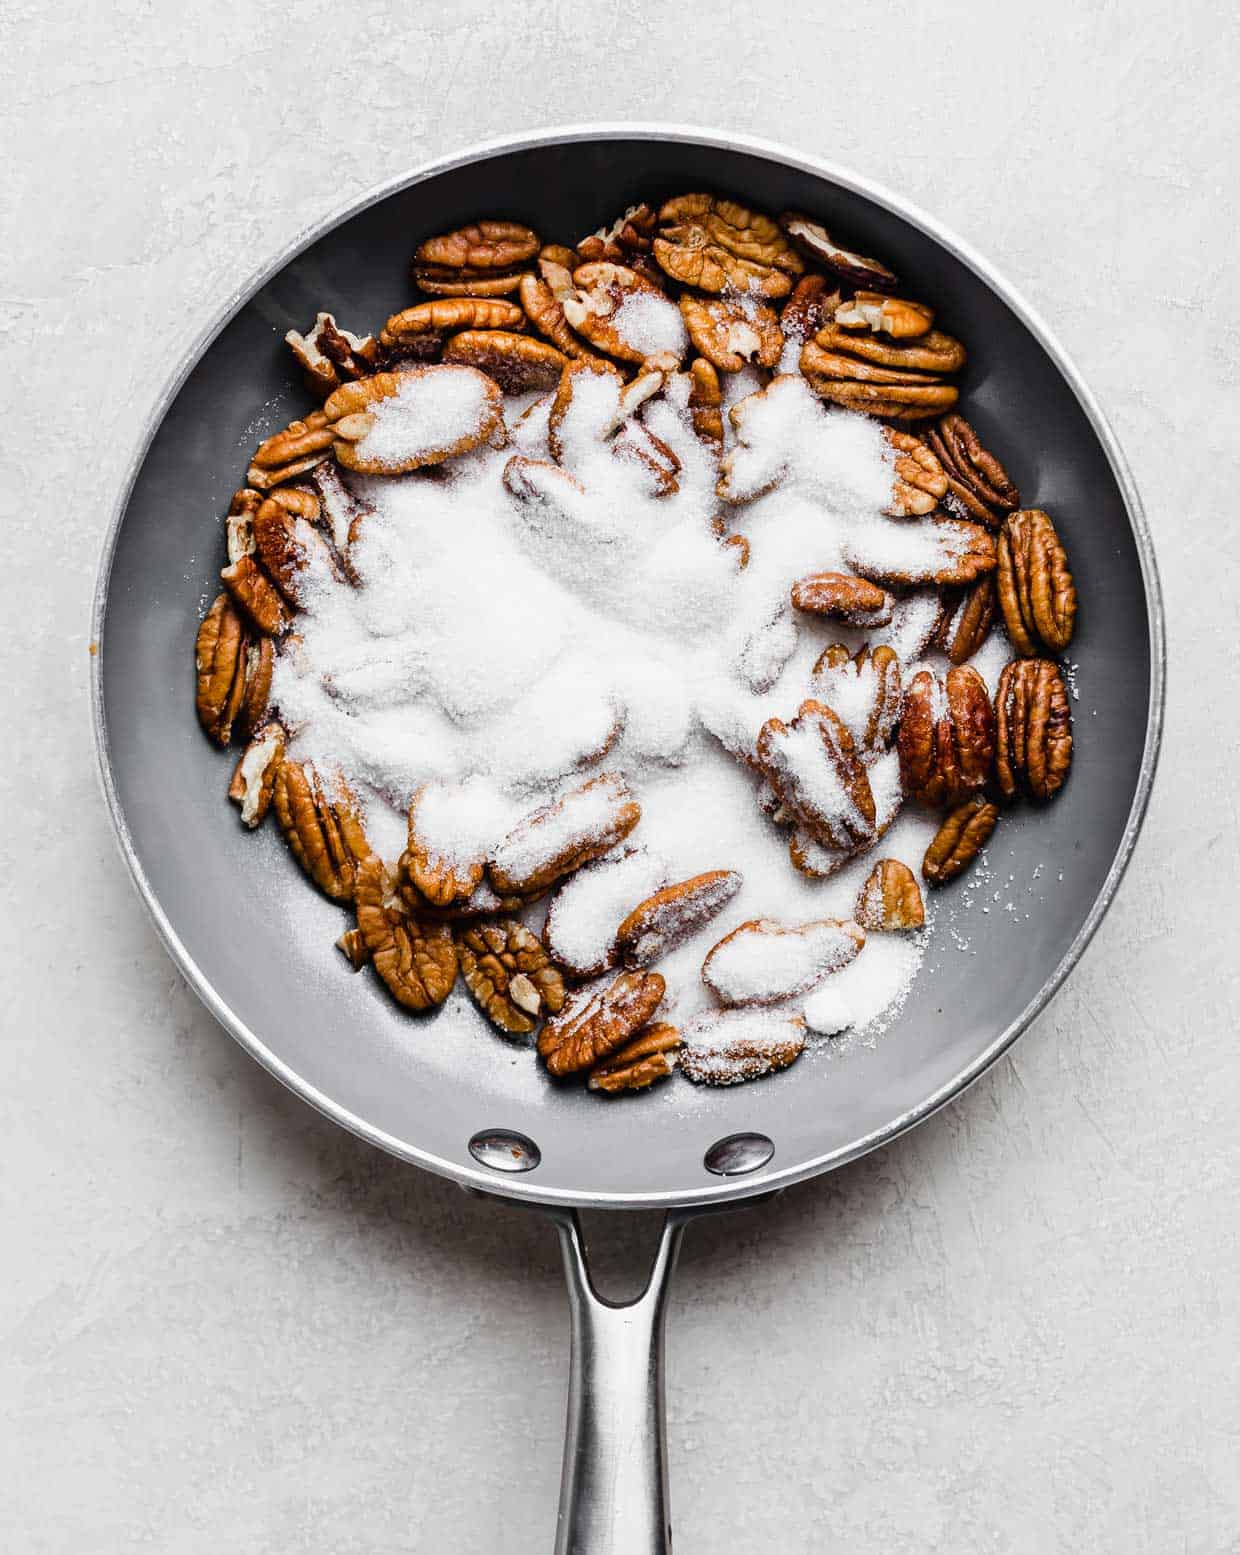 Pecan halves in a gray skillet with granulated sugar over the pecans.